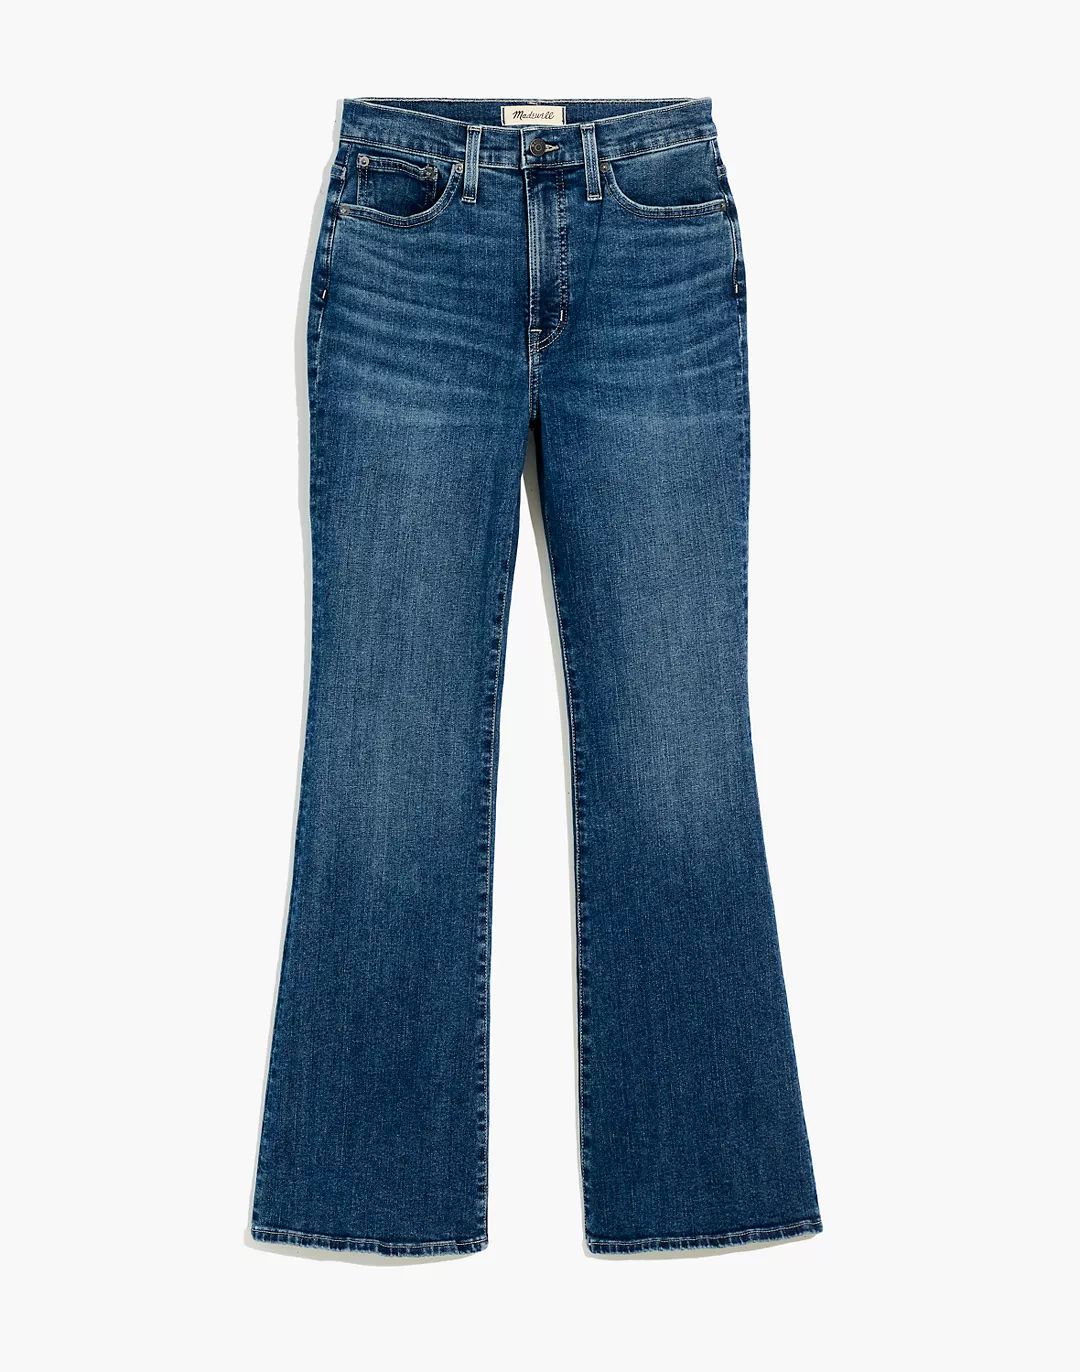 The Petite Perfect Vintage Flare Jean in Hallstrom Wash | Madewell